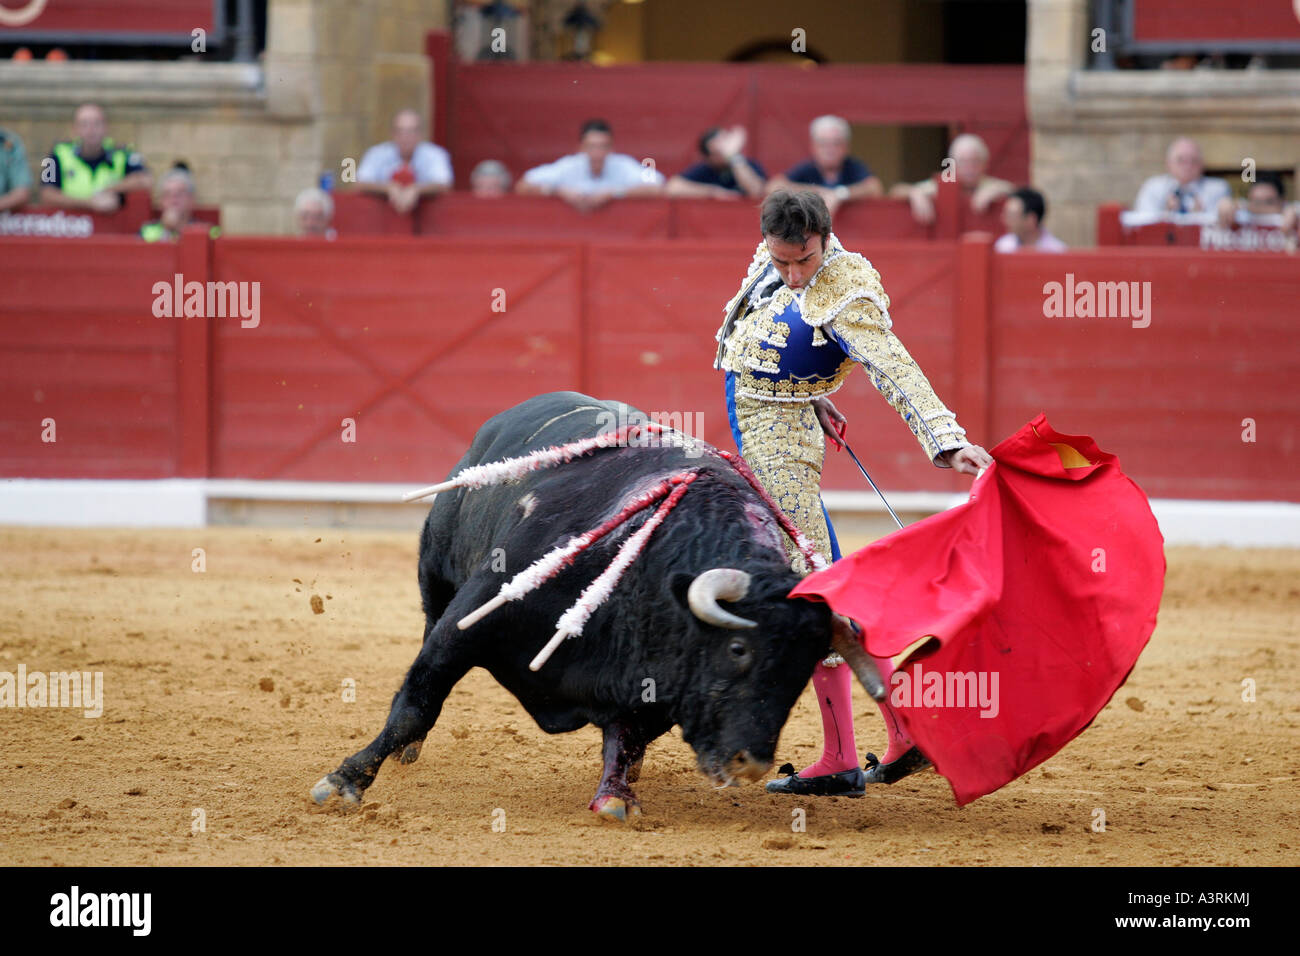 Enrique ponce spanish bullfighter hi-res stock photography and images -  Page 2 - Alamy